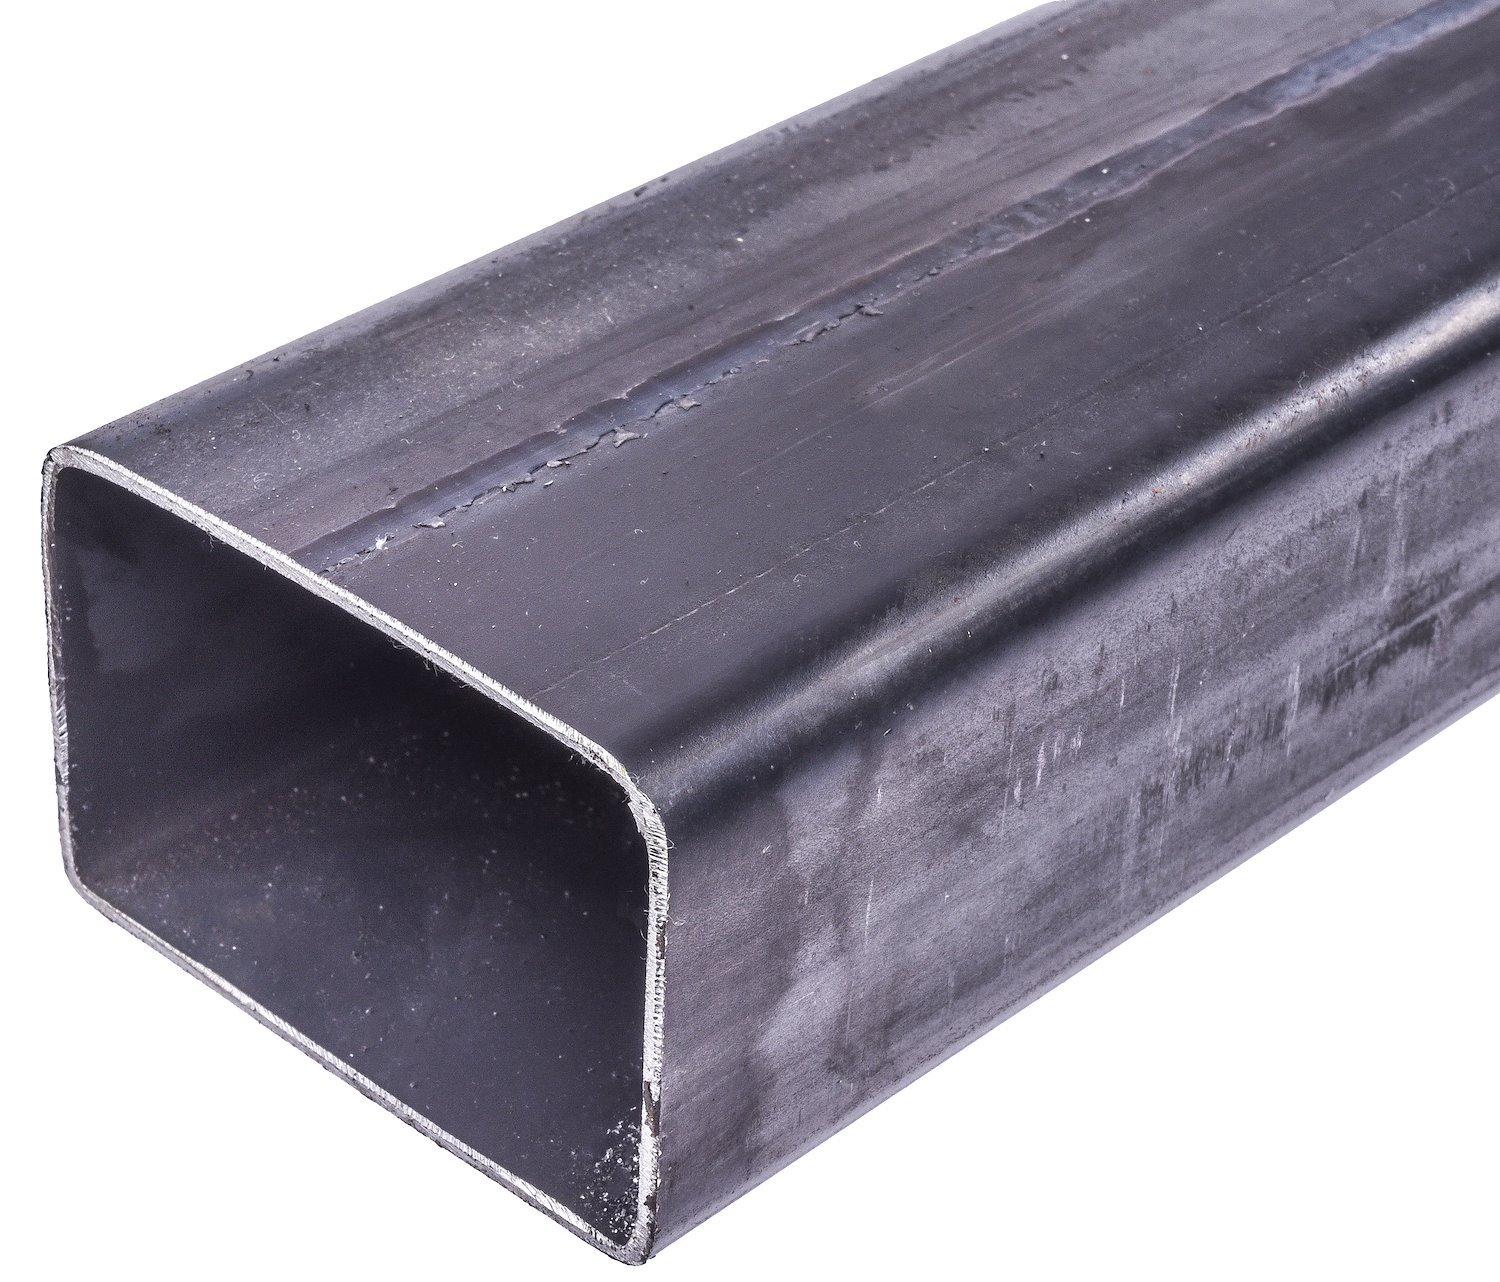 Mild Steel Tubing [Rectangular, 2 in. Height x 3 in. Width x 0.083 in. Thickness x 8 ft. Length]